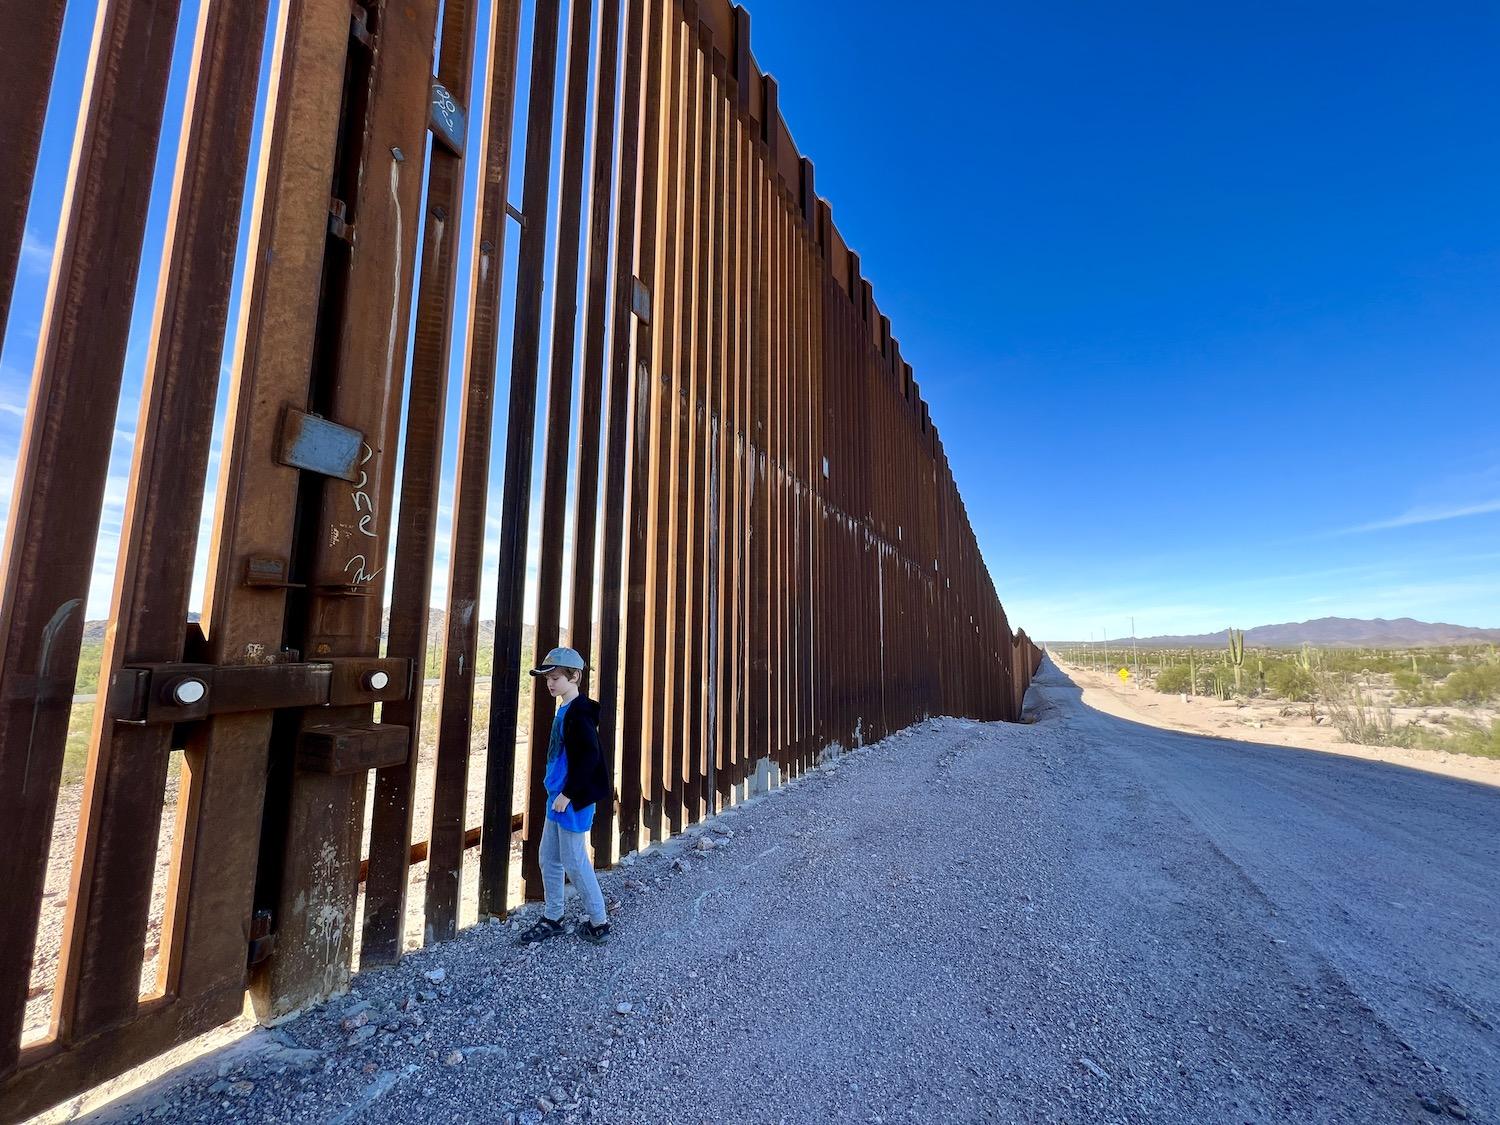 Writer Jennifer Bain's son experiences the border wall along the southern boundary of Organ Pipe Cactus National Monument.